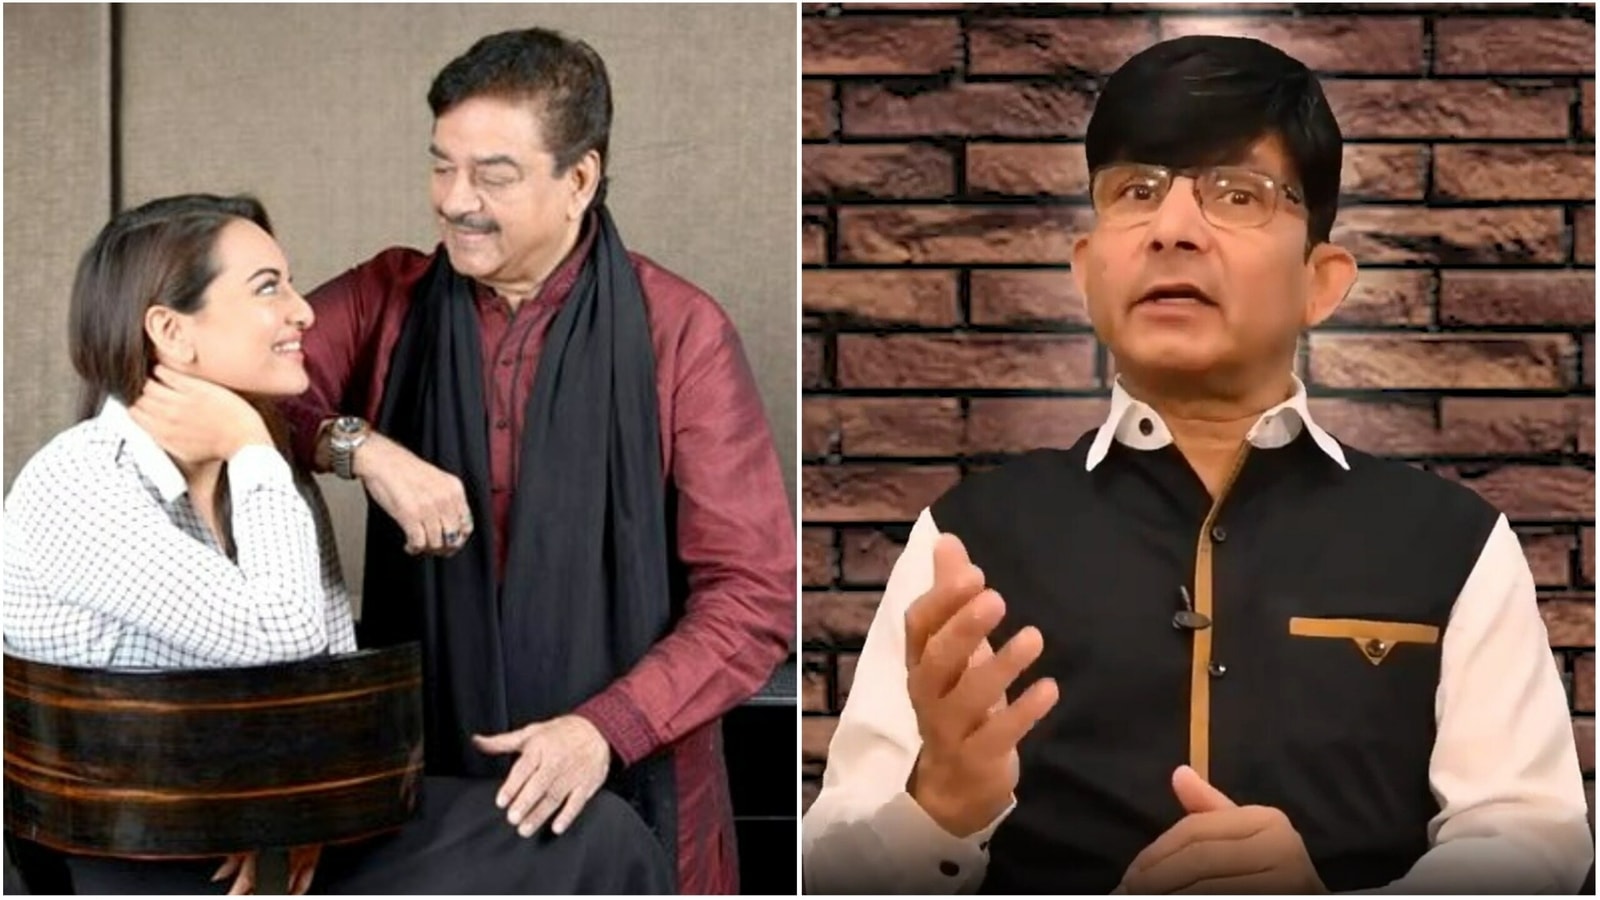 Shatrughan Sinha says people said ‘nasty things’ about him and Sonakshi Sinha for his supportive tweet for KRK